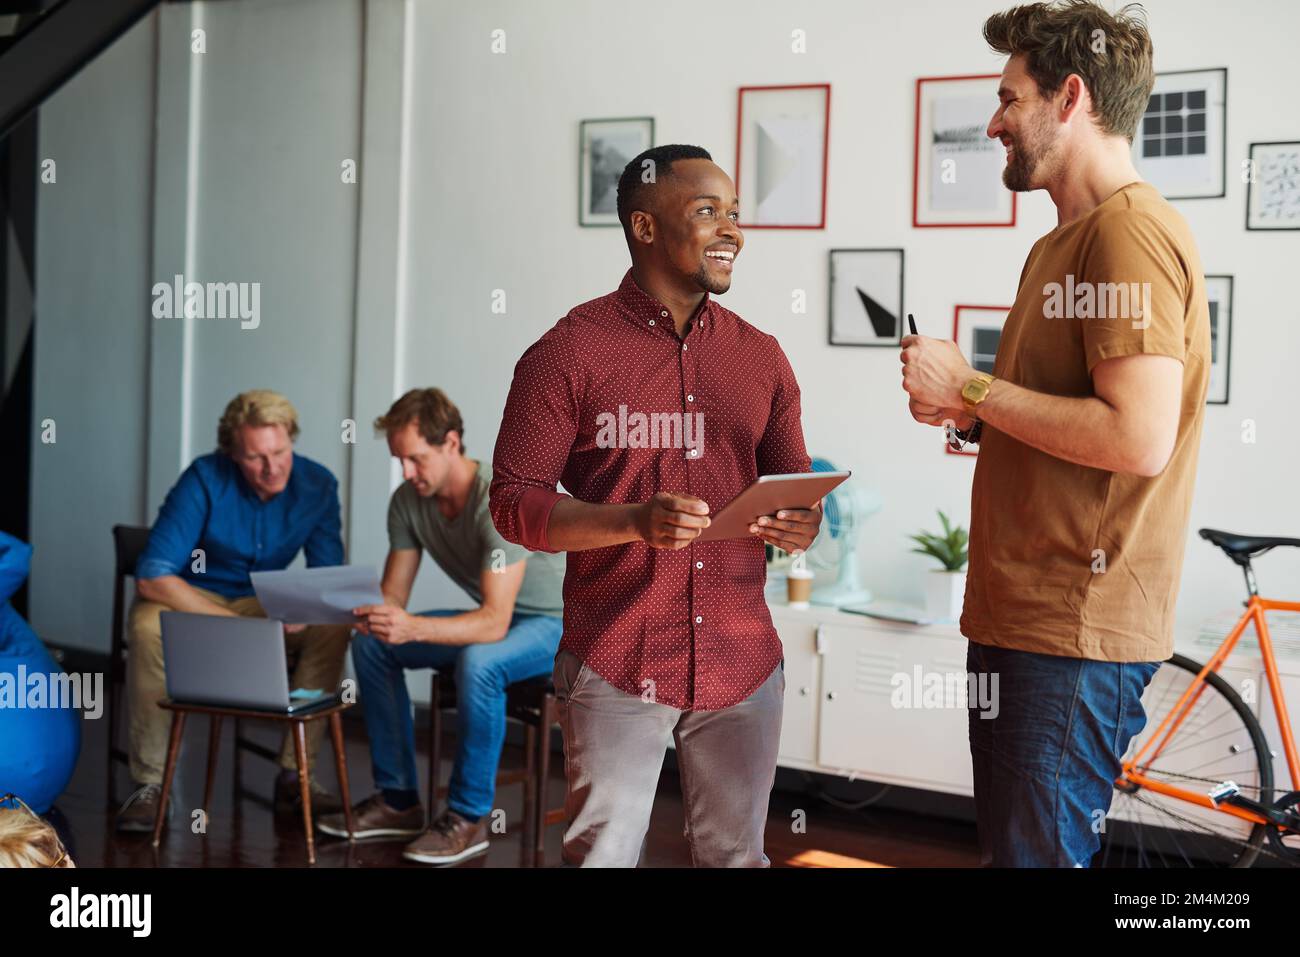 Collaboration is the secret to great ideas. two designers discussing something in an office. Stock Photo